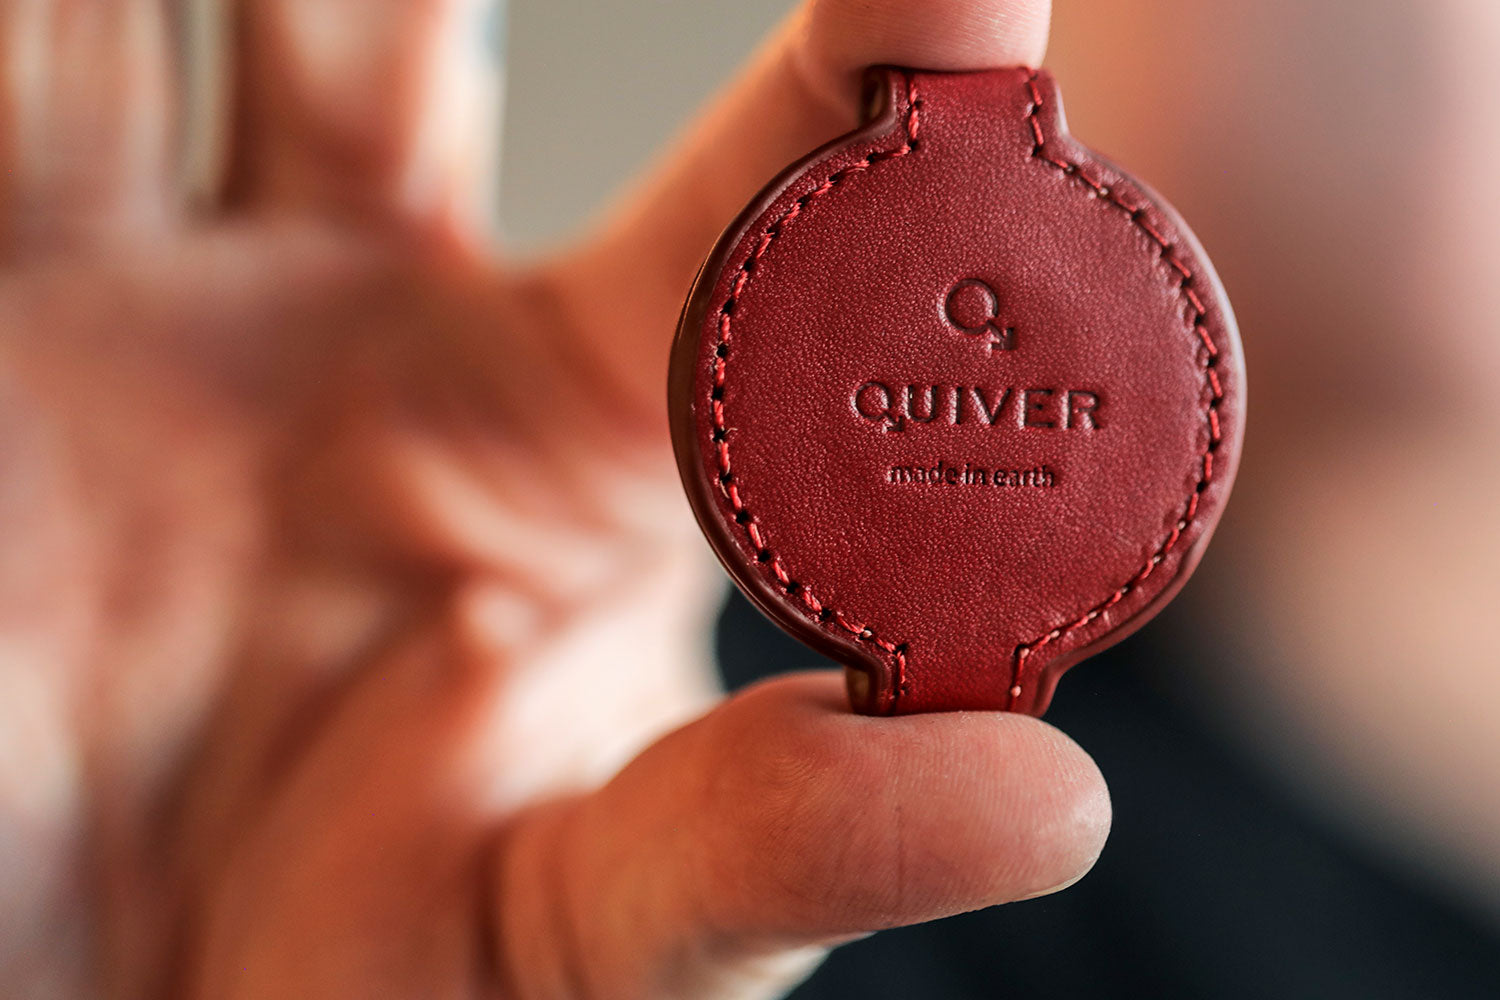 Quiver Coin Holder by Ellusionist | Ellusionist